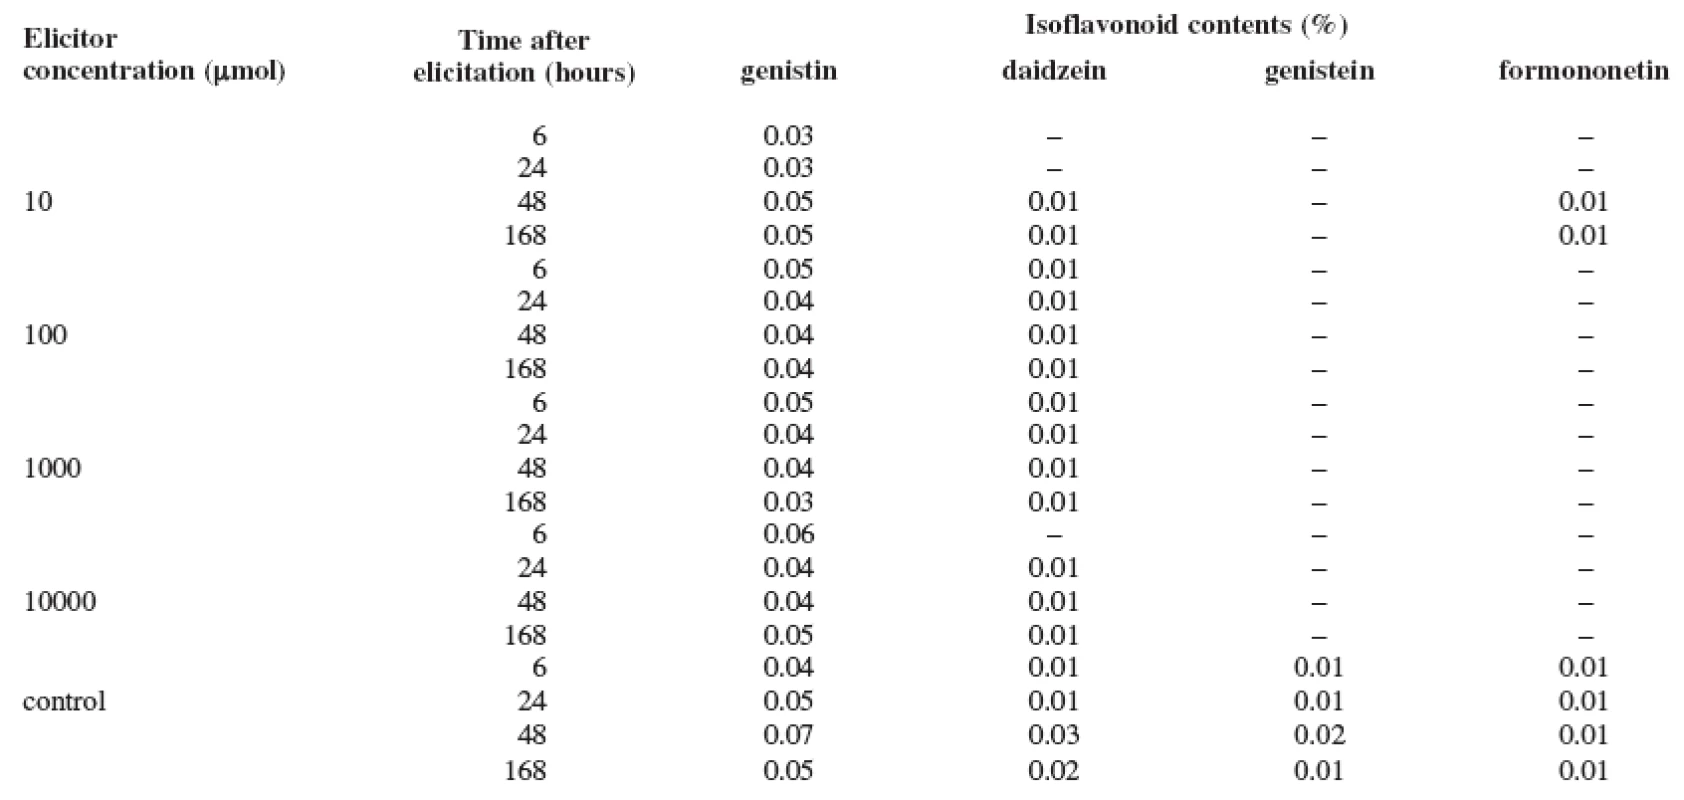 Production of isoflavonoids in the suspension culture of Trifolium pratense L. elicited with salicylic acid